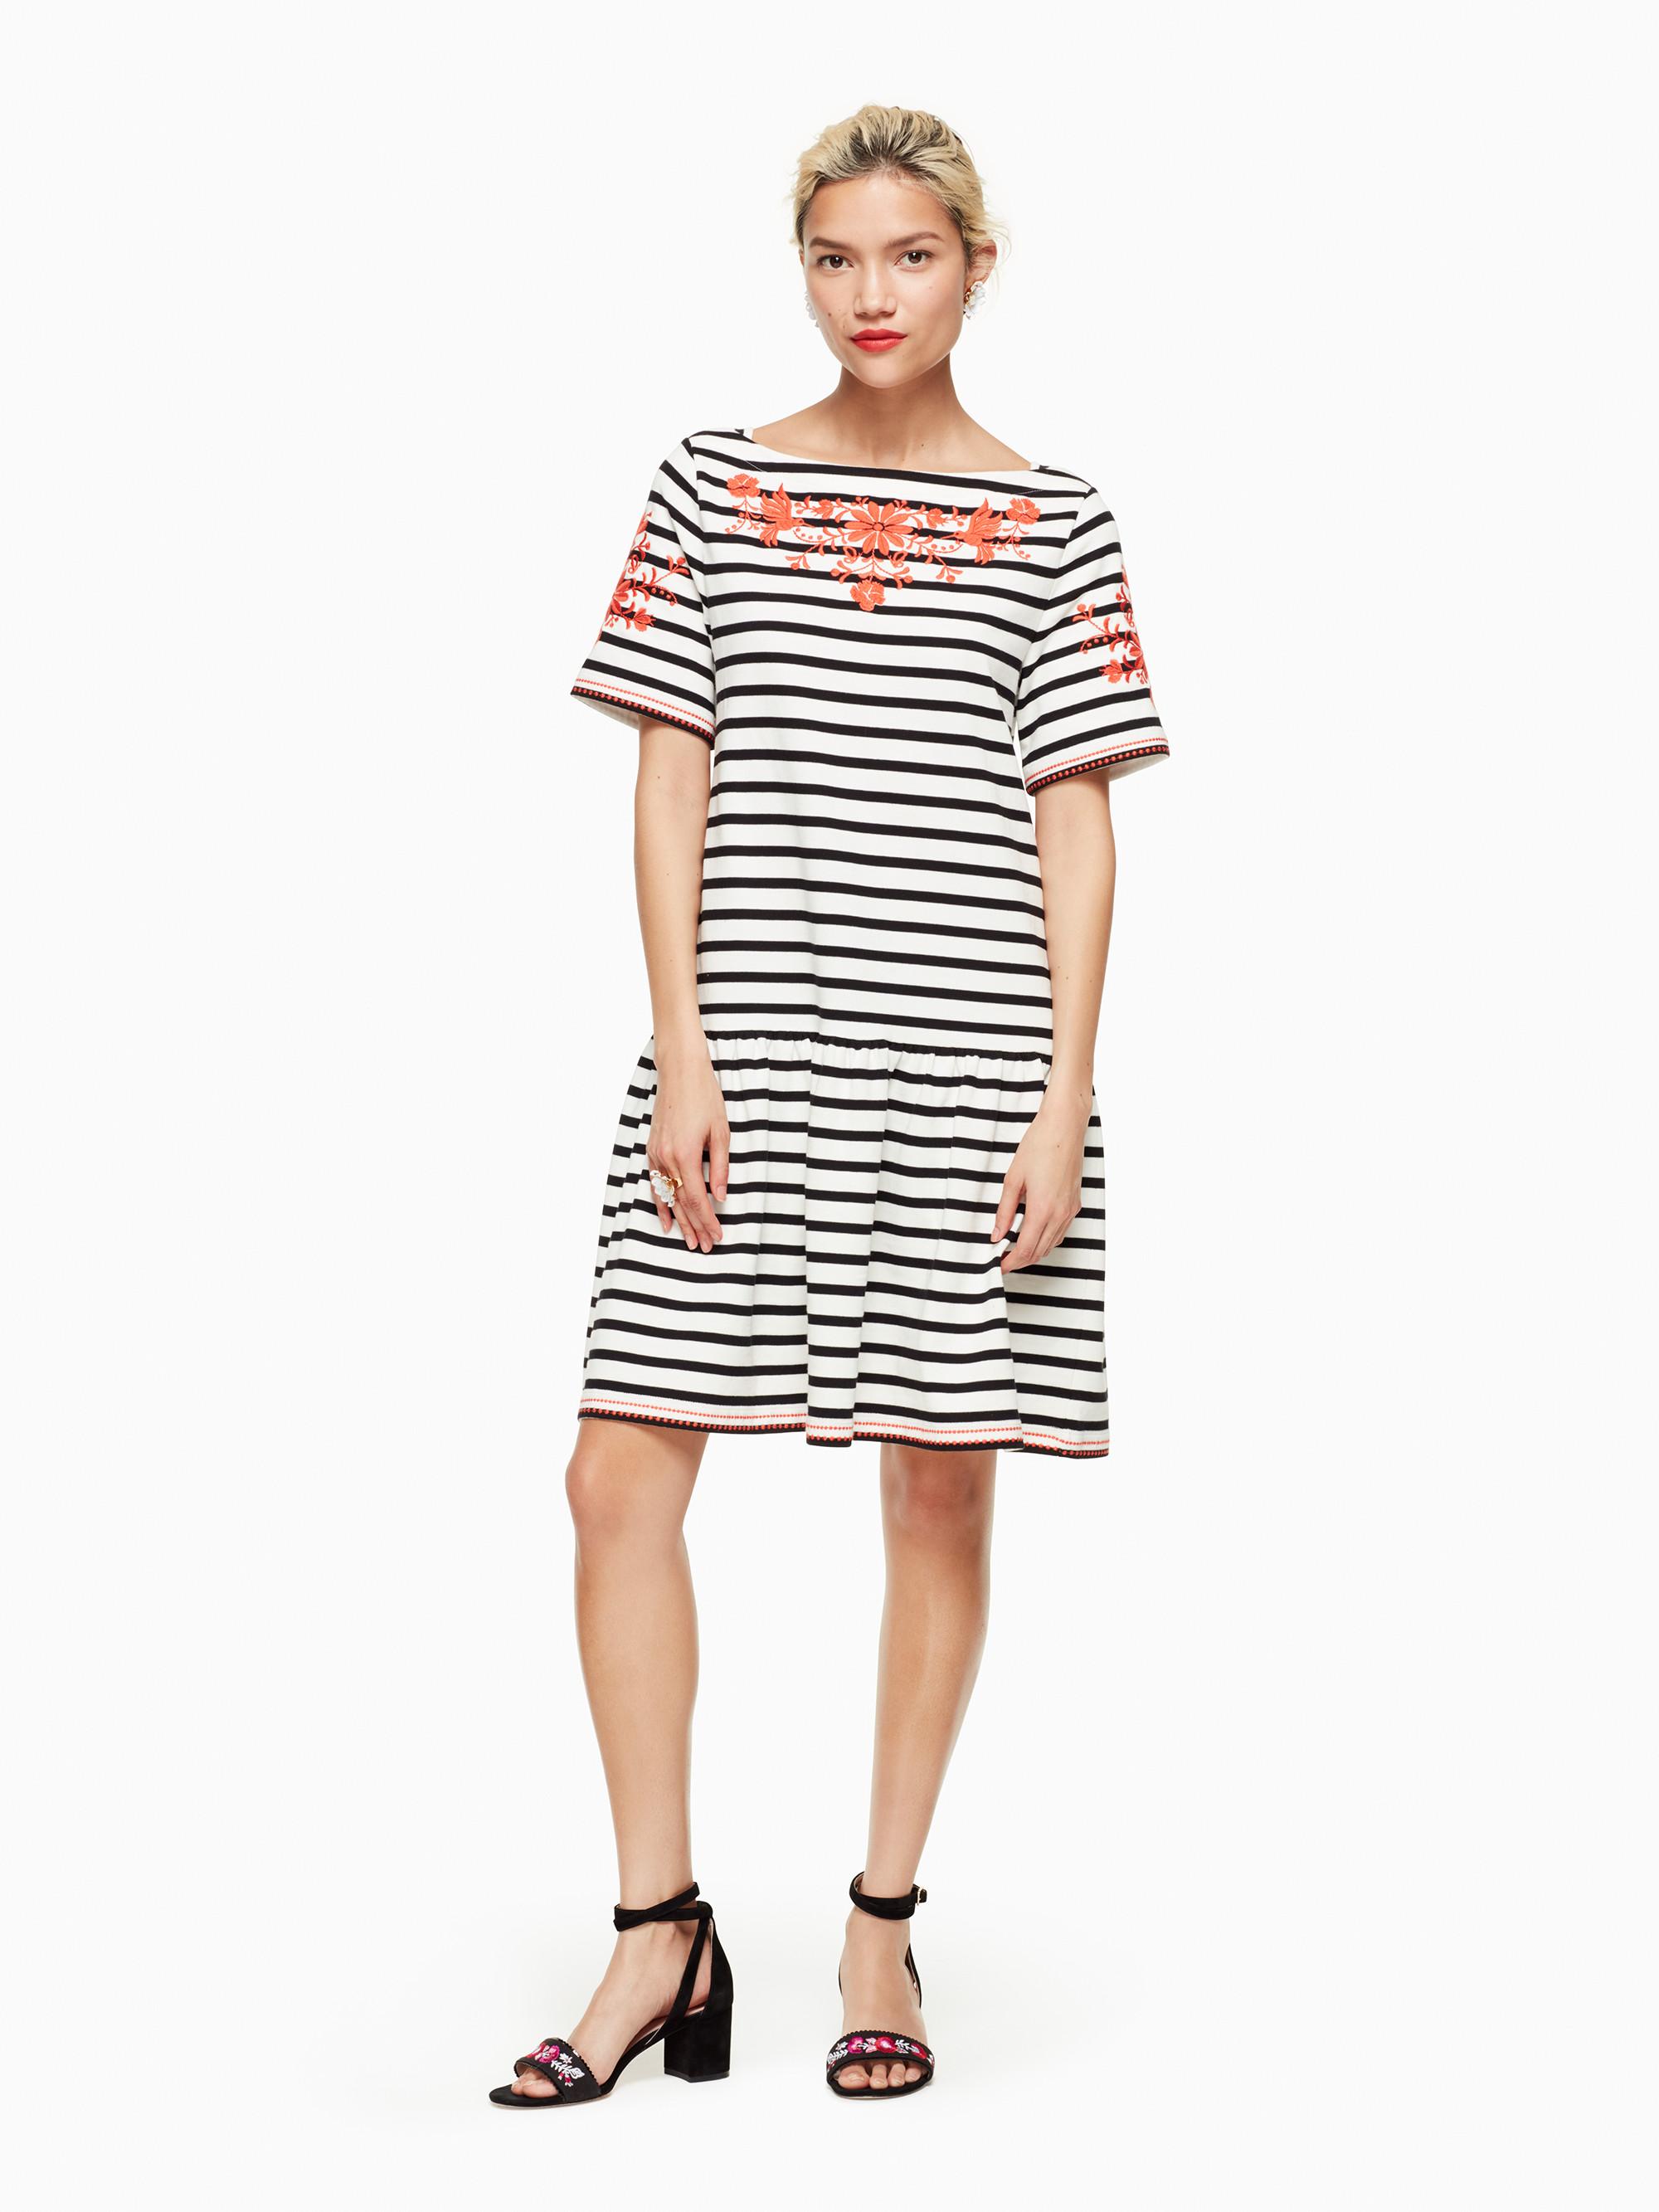 Lyst - Kate Spade Stripe Embroidered Dress